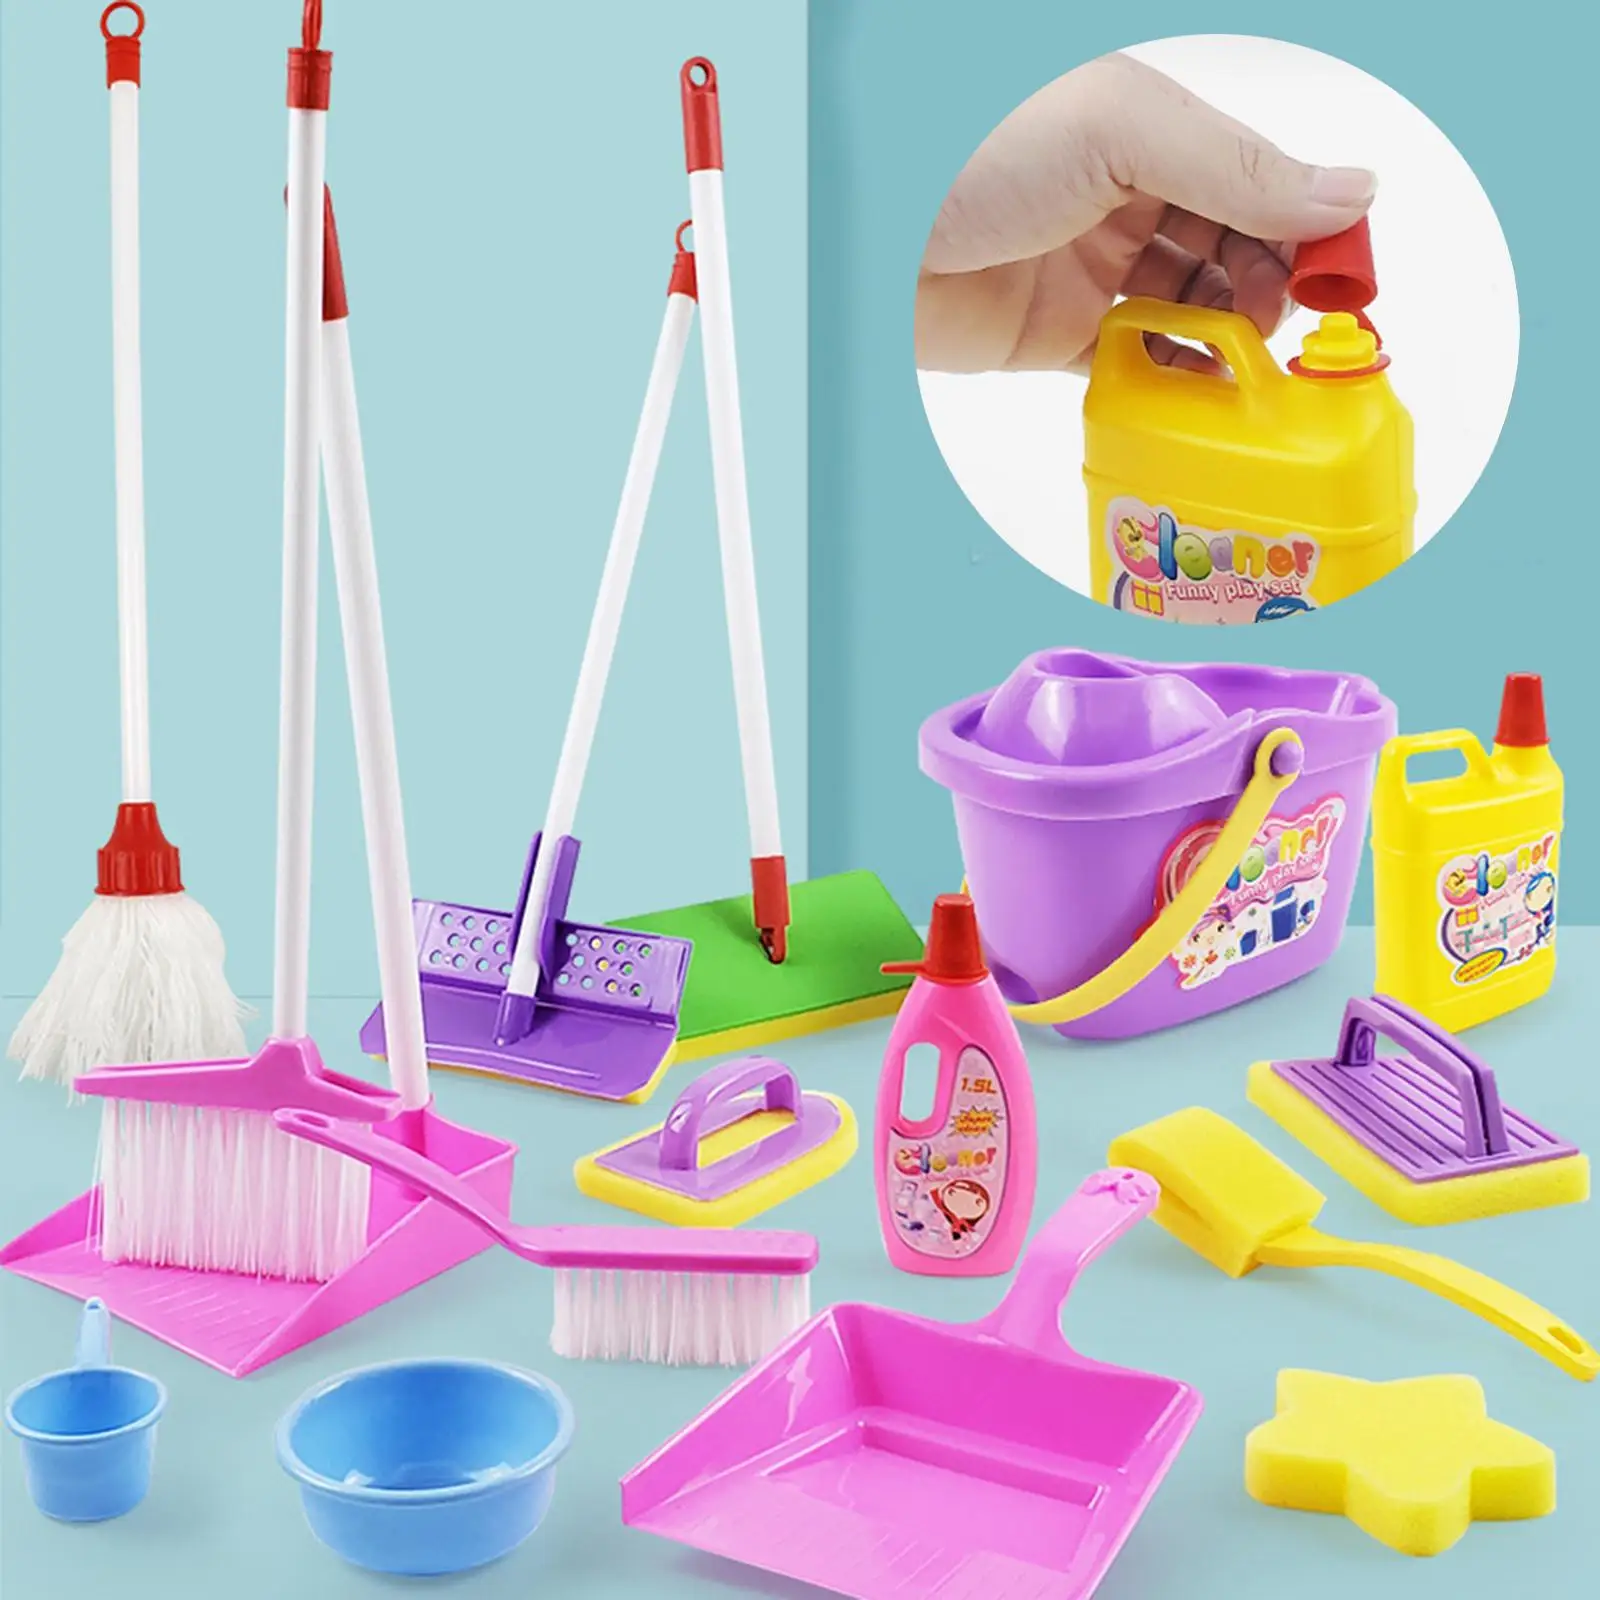 Kids Cleaning Toy Broom Role  Mop Spray for Children Easter Gifts